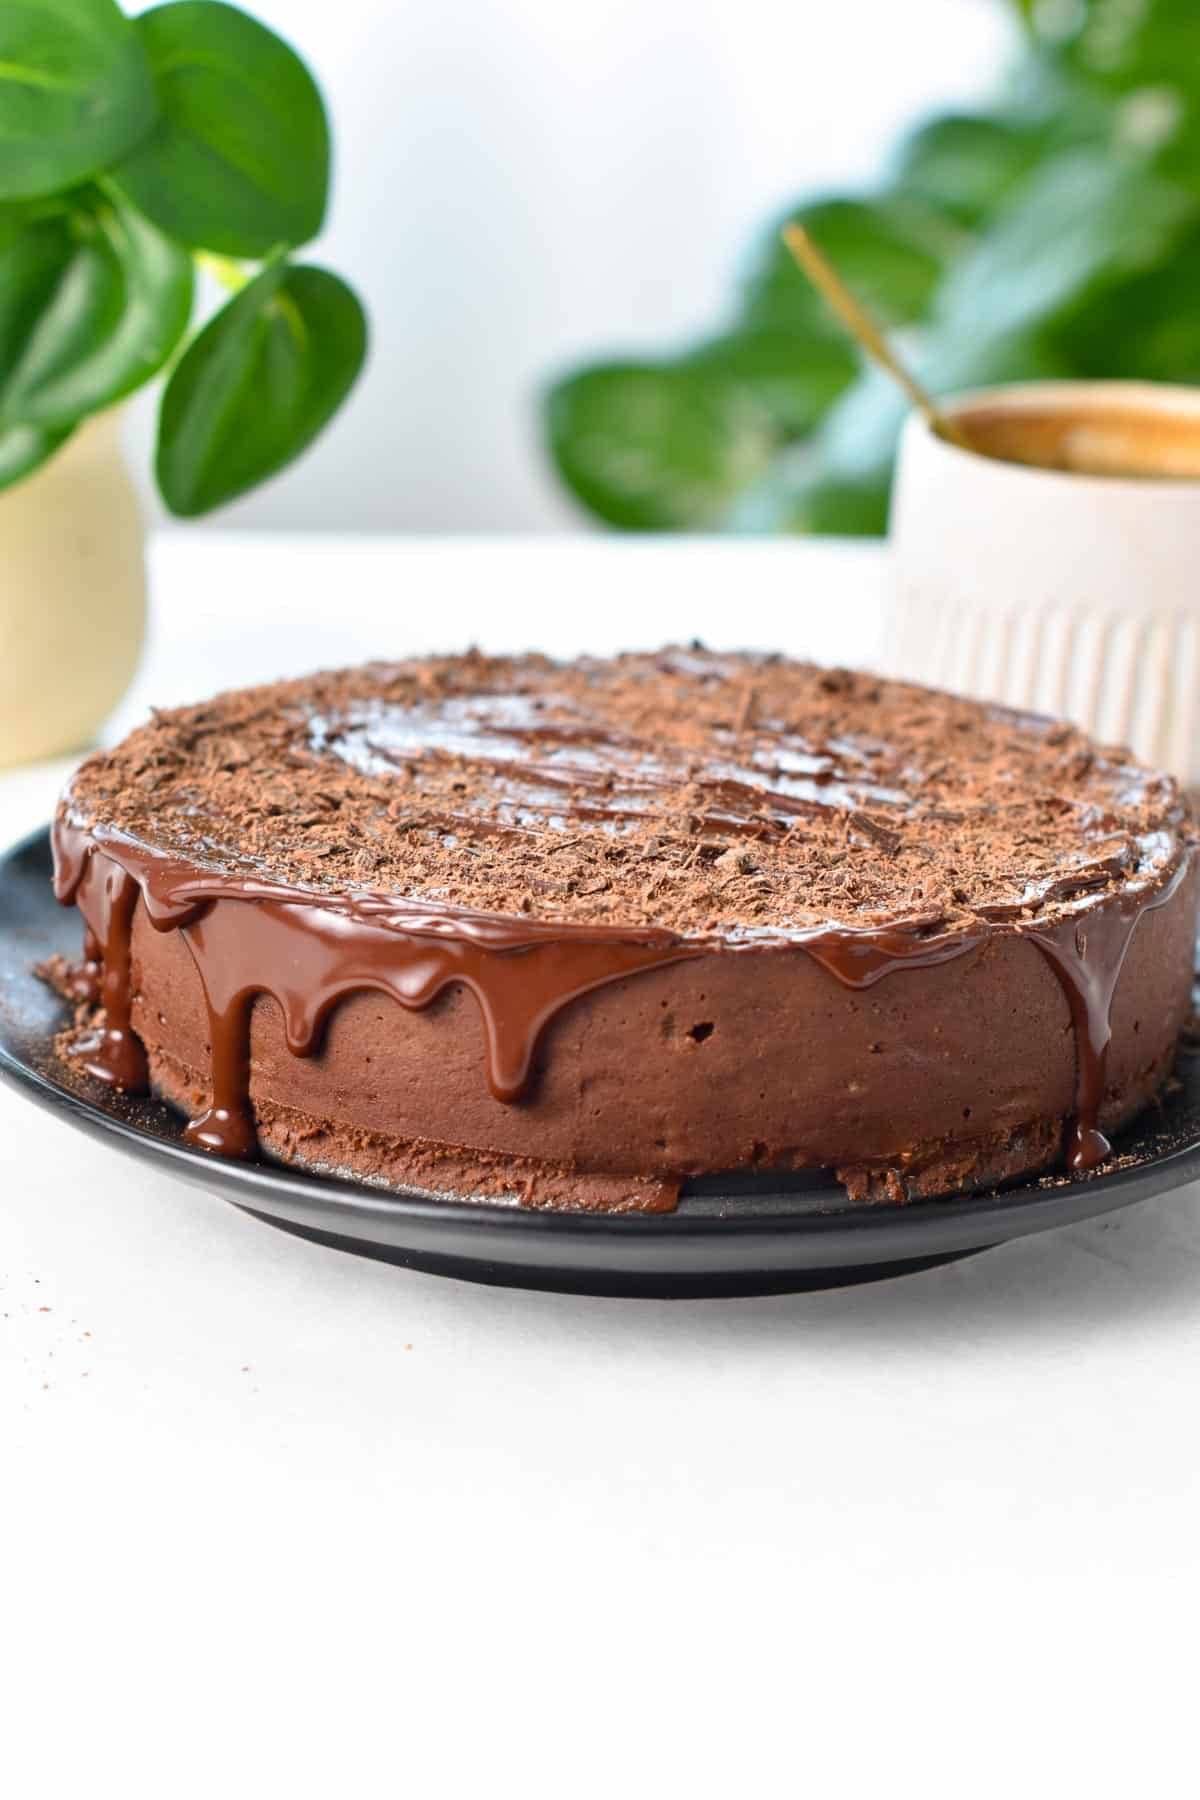 A no-bake chocolate cake with a drizzle of vegan ganache on top.